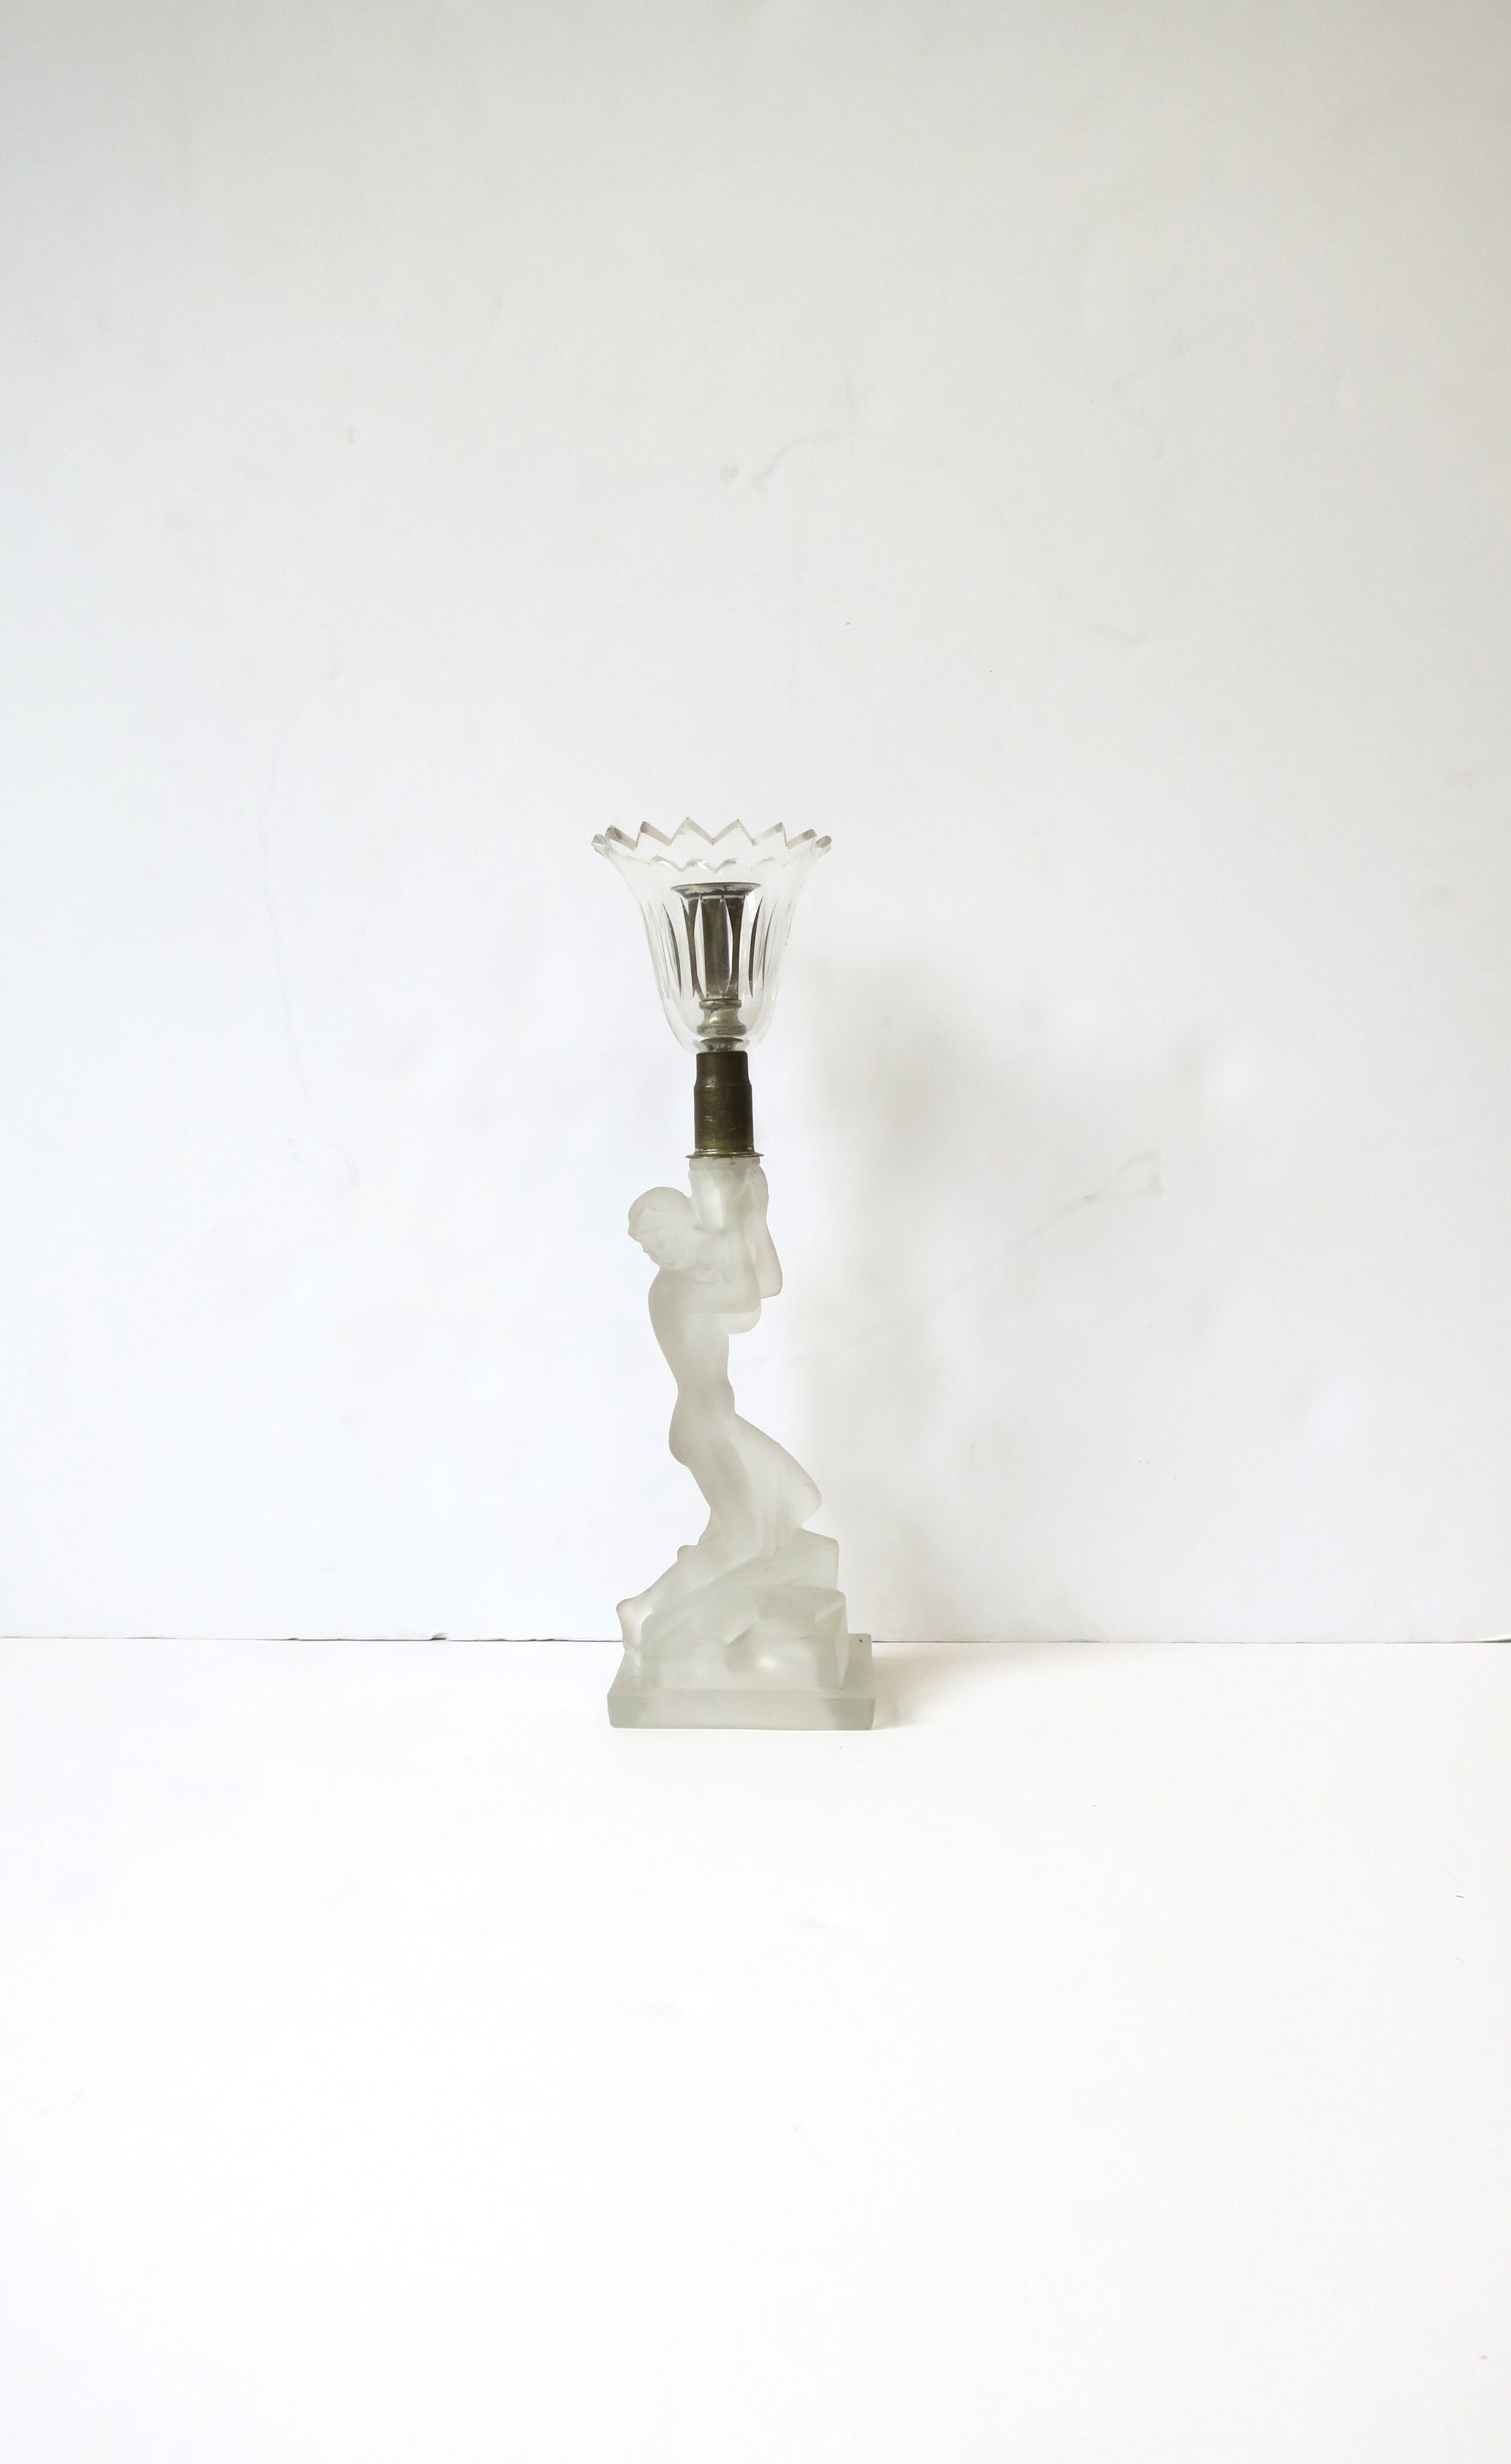 A beautiful Art Deco period female figurative candlestick holder attributed to French crystal Maison Lalique, circa early 20th century, Europe. An Art Deco period piece depicting a woman shown kneeling and holding troche. Beautiful as it's intended